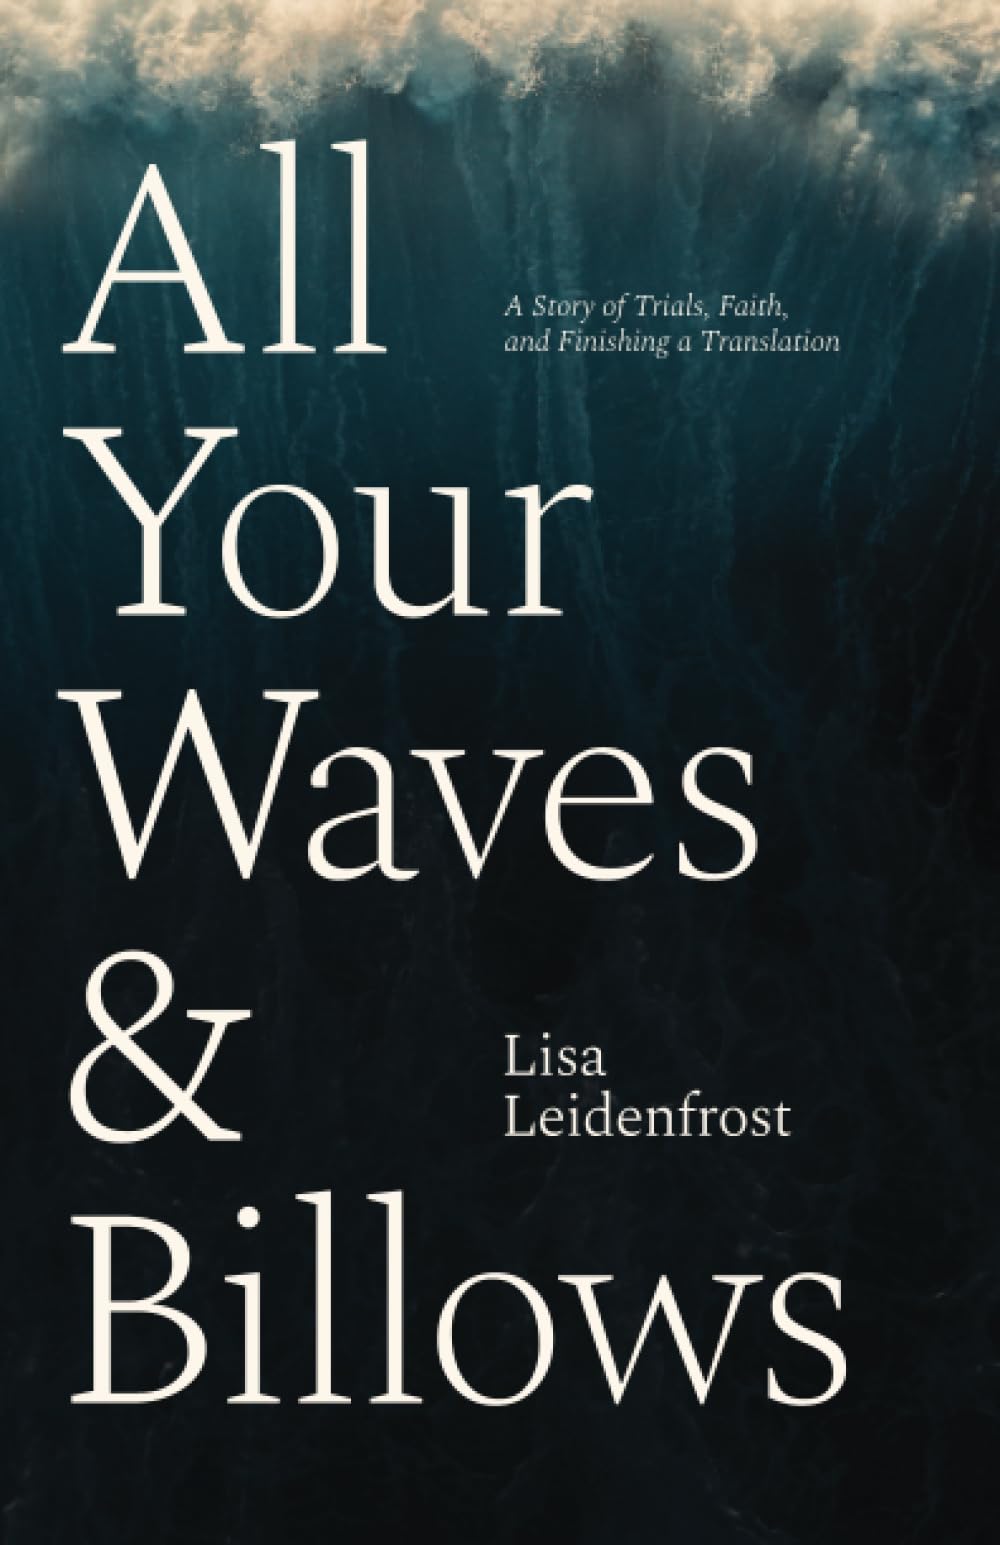 All Your Waves & Billows (Leidenfrost - paperback)